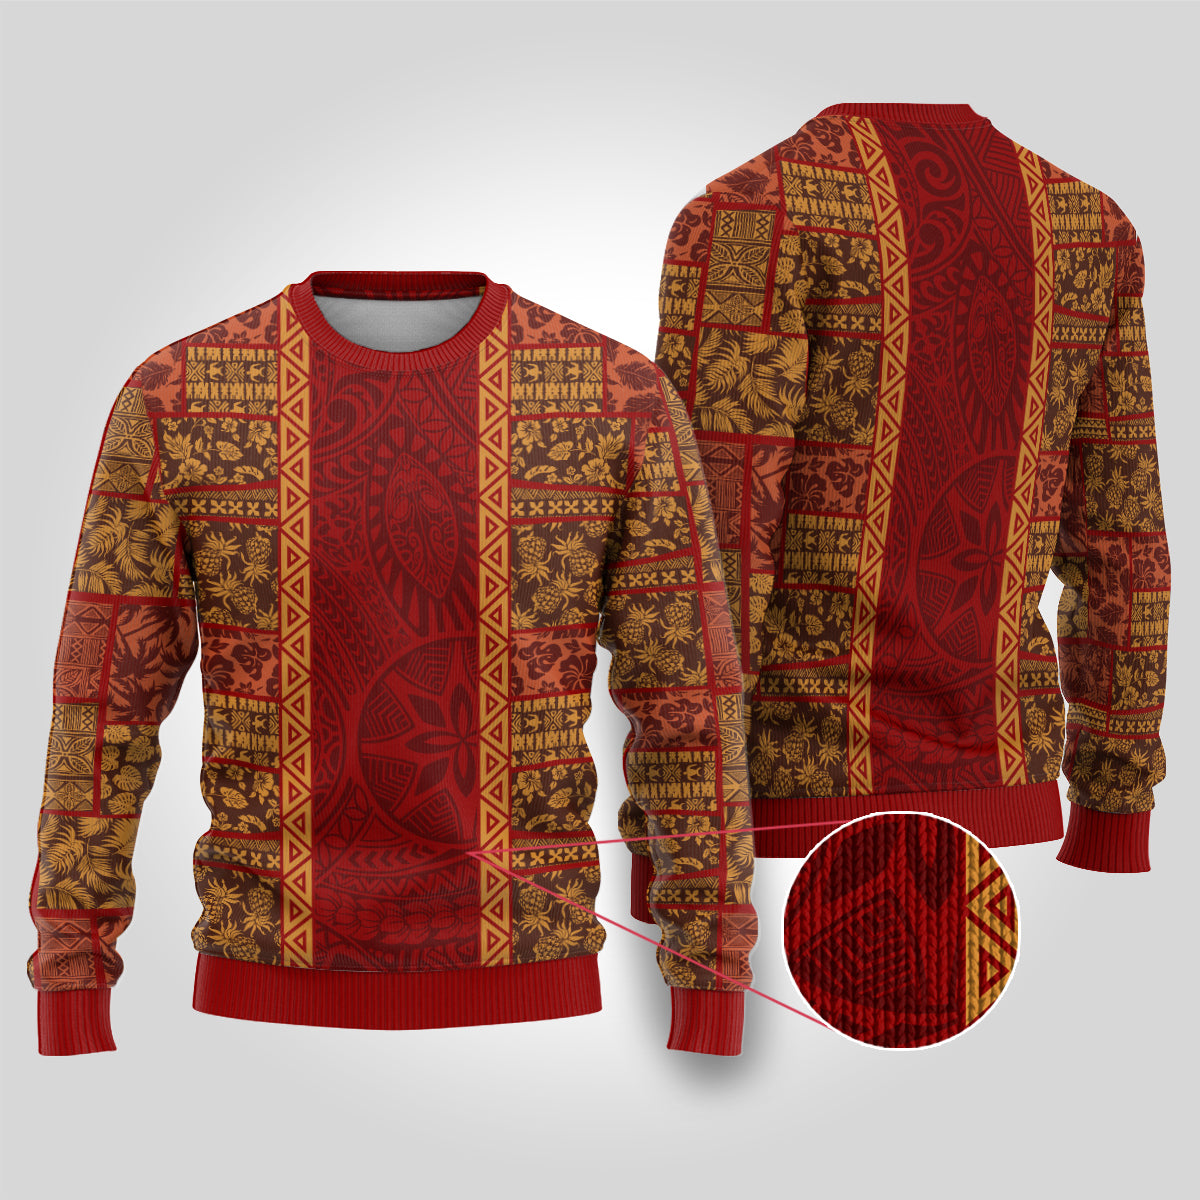 Hawaii Style Hibiscus and Tribal Element Fabric Patchwork Ugly Christmas Sweater LT03 Red - Polynesian Pride